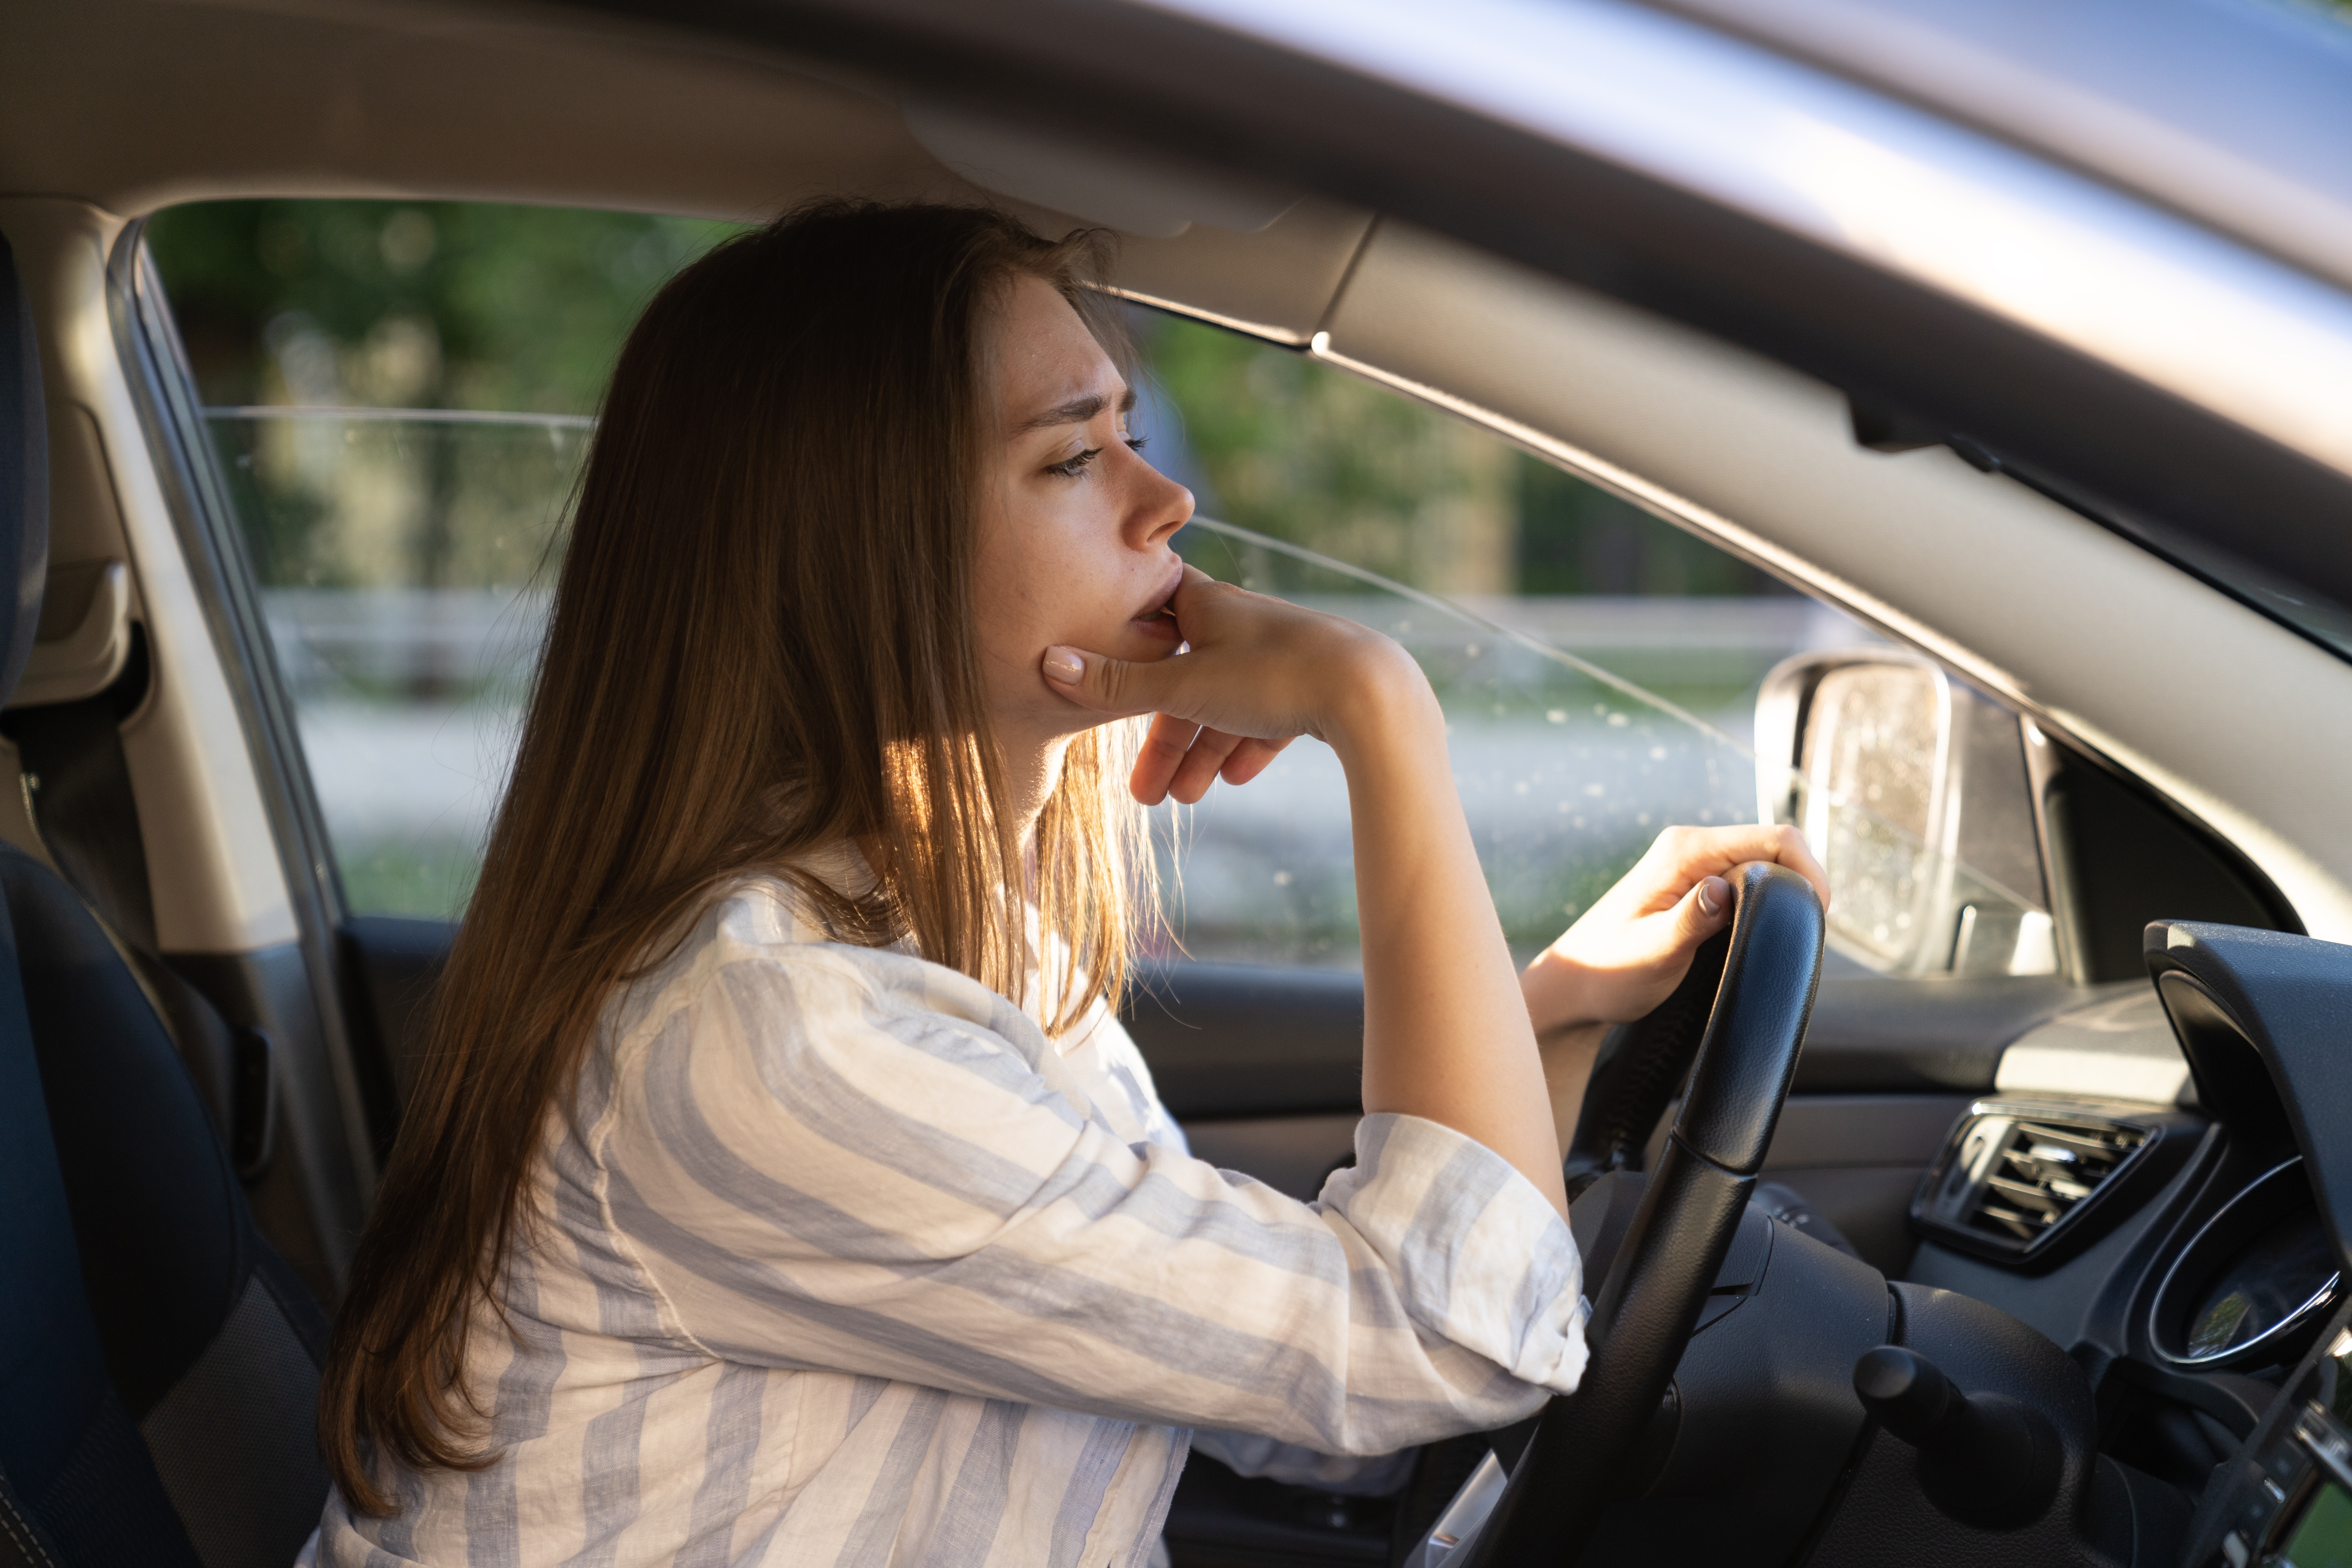 Unhappy female driver depressed and anxious hold hand on steering wheel look at road with anxiety. | Source: Shutterstock